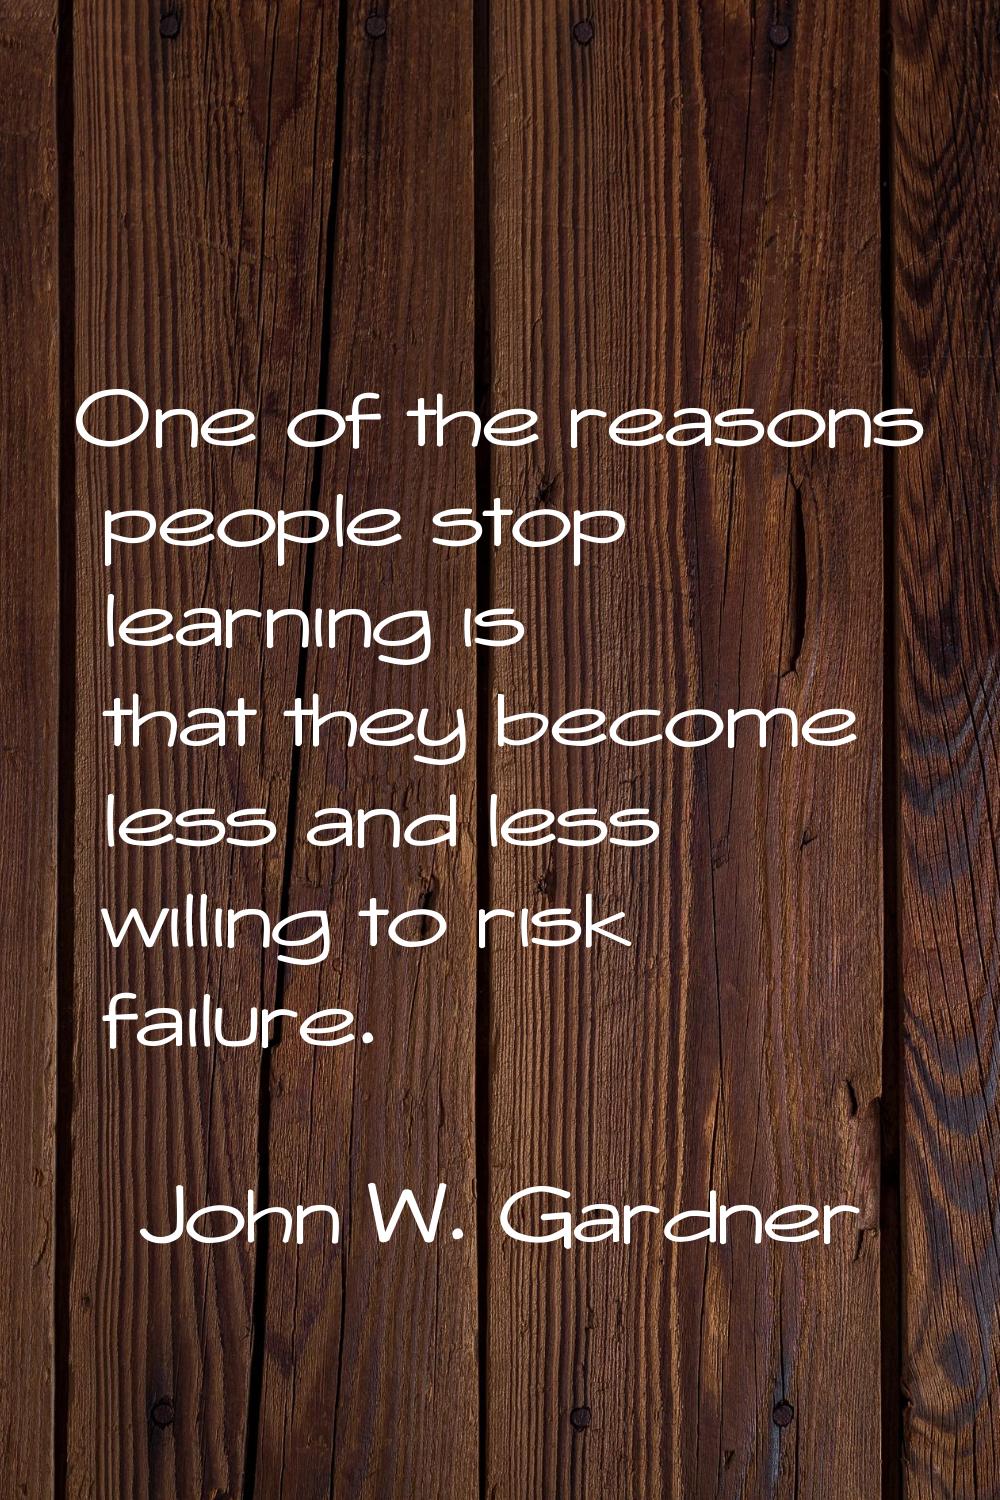 One of the reasons people stop learning is that they become less and less willing to risk failure.